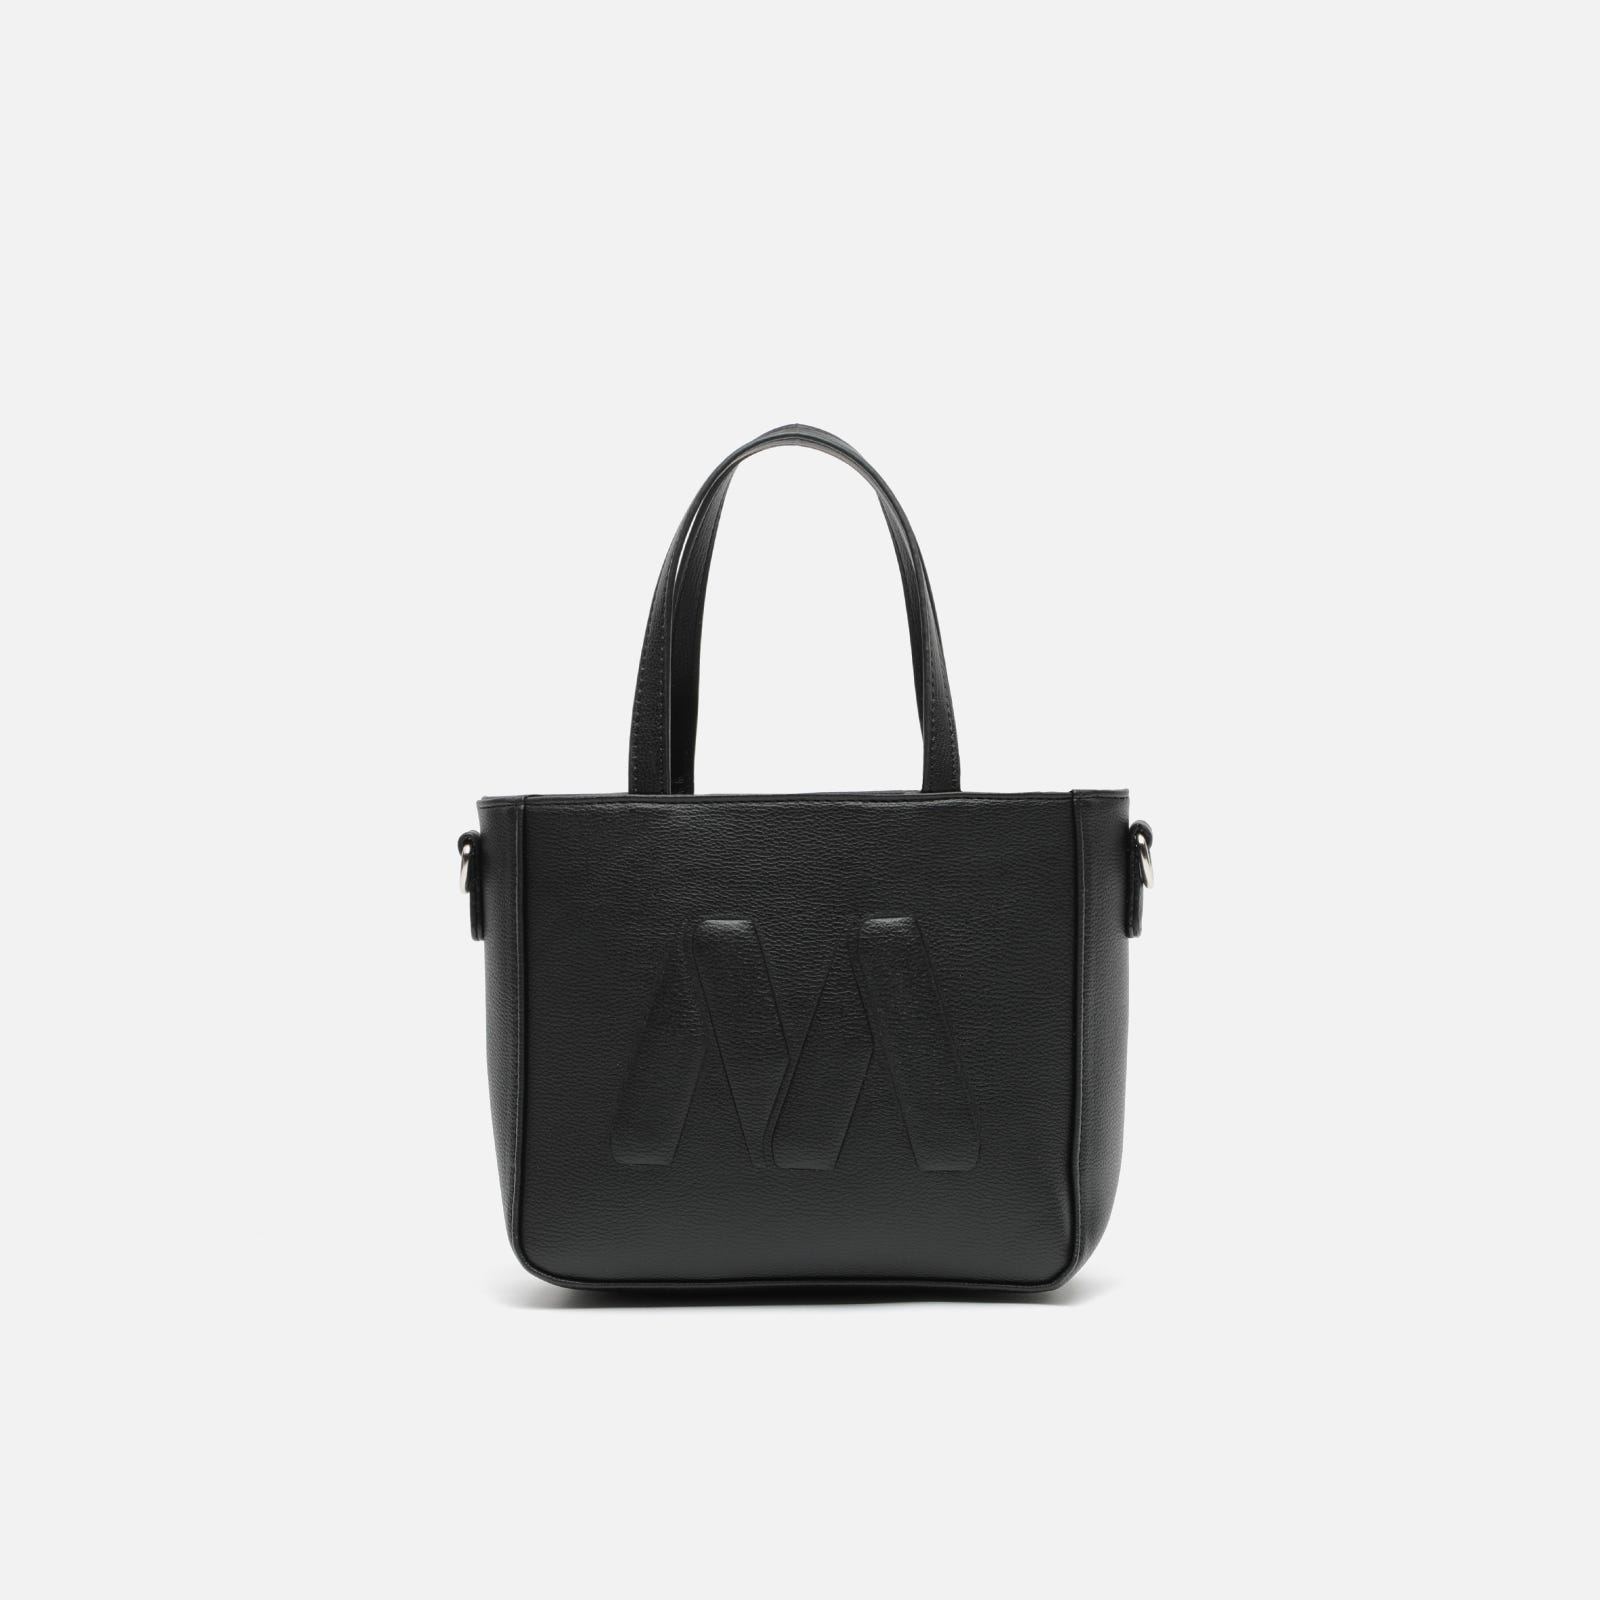 Small tote bag with shoulder handle